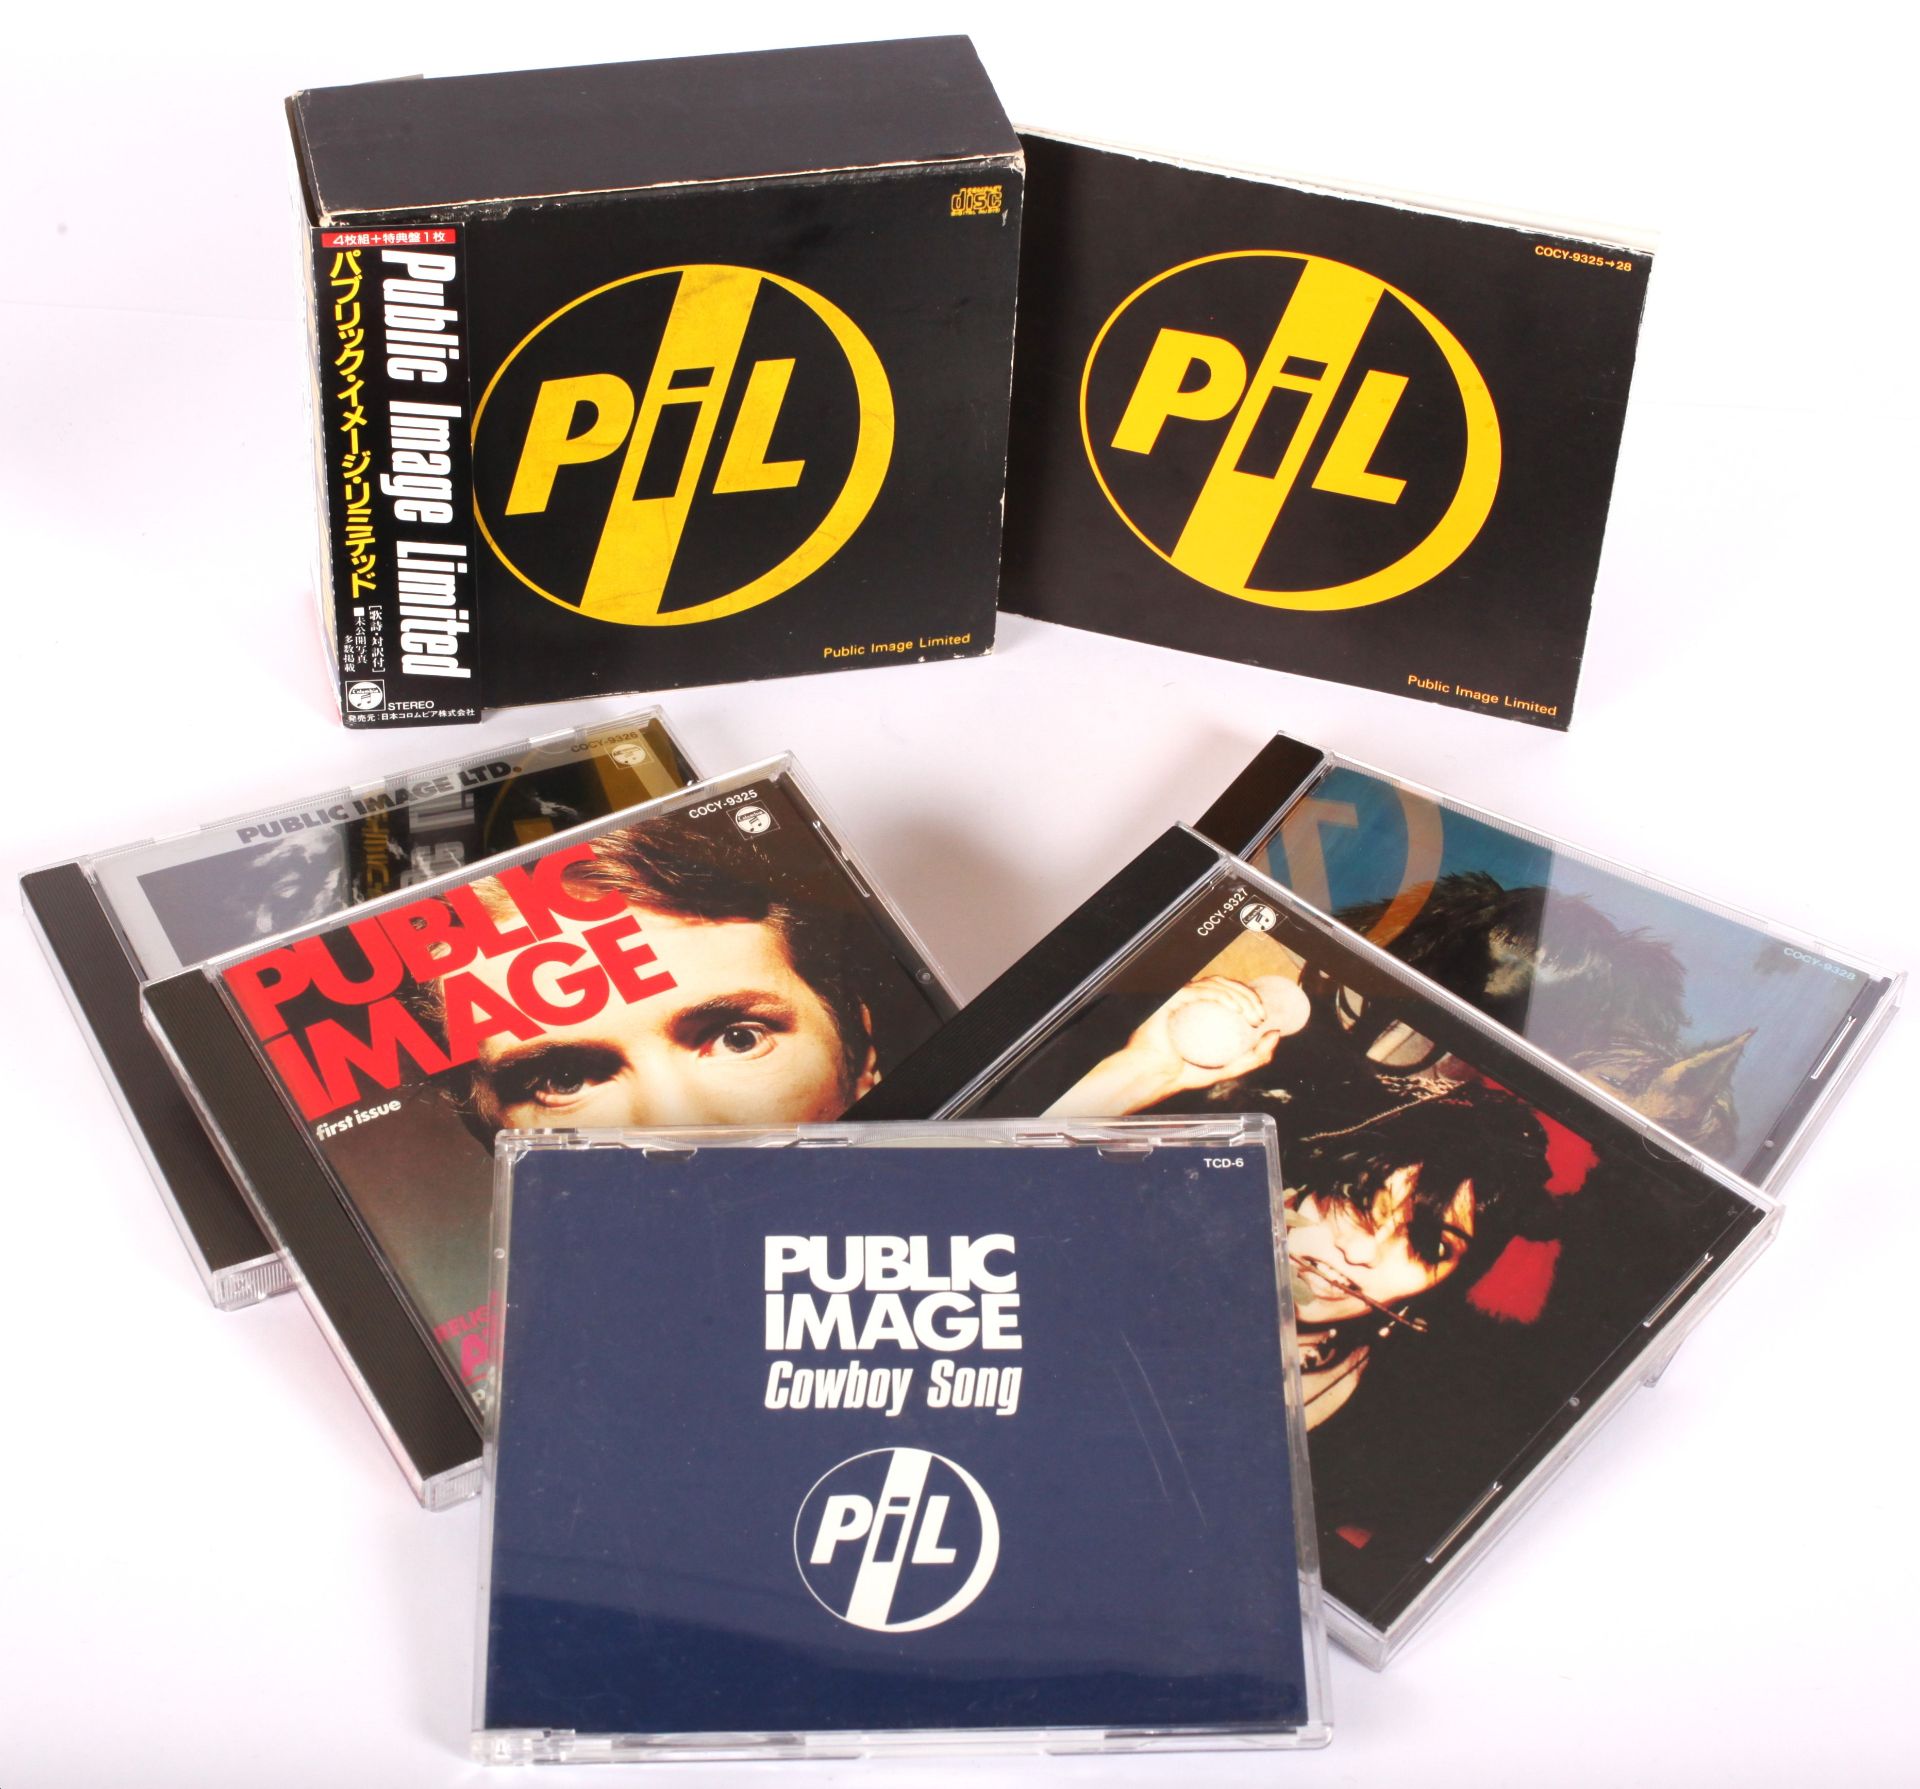 Public Image Limited - PiL CD Box Vol. 1 Japanese Issue